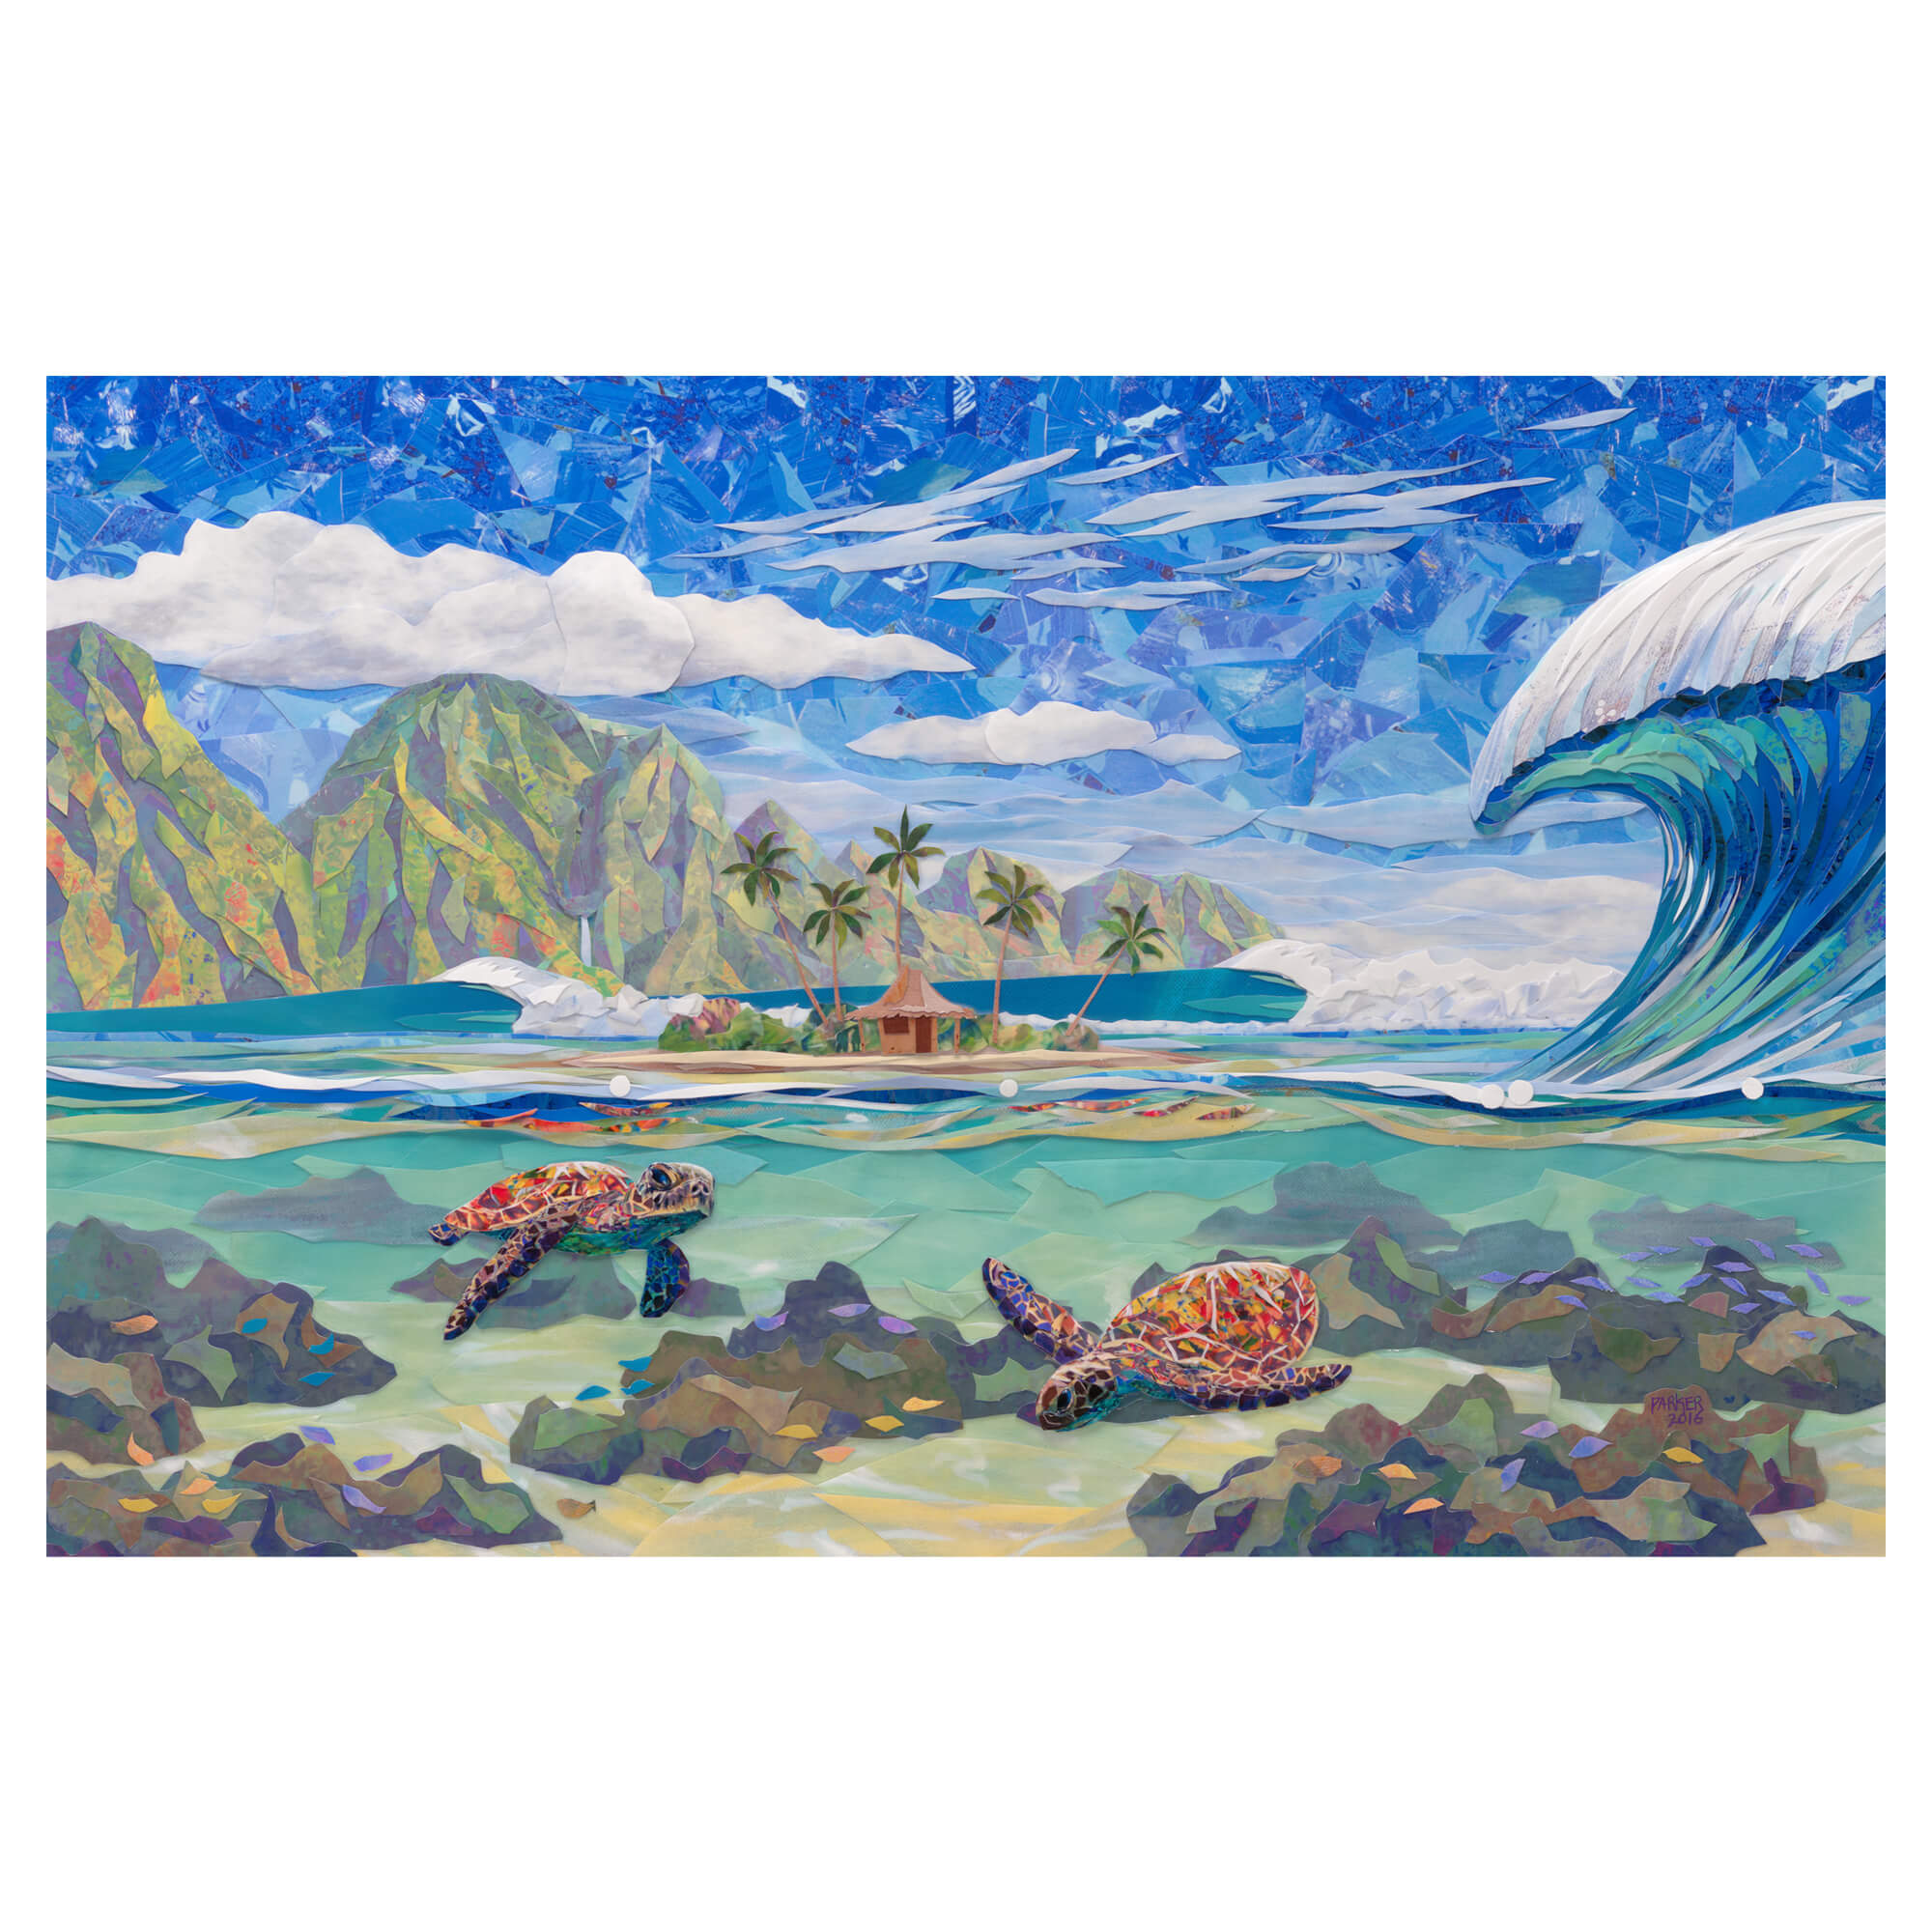 A matted art print featuring a collage of a tranquil seascape with two swimming sea turtles a hut on an island, a huge crashing wave, and a mountain background by Hawaii artist Patrick Parker